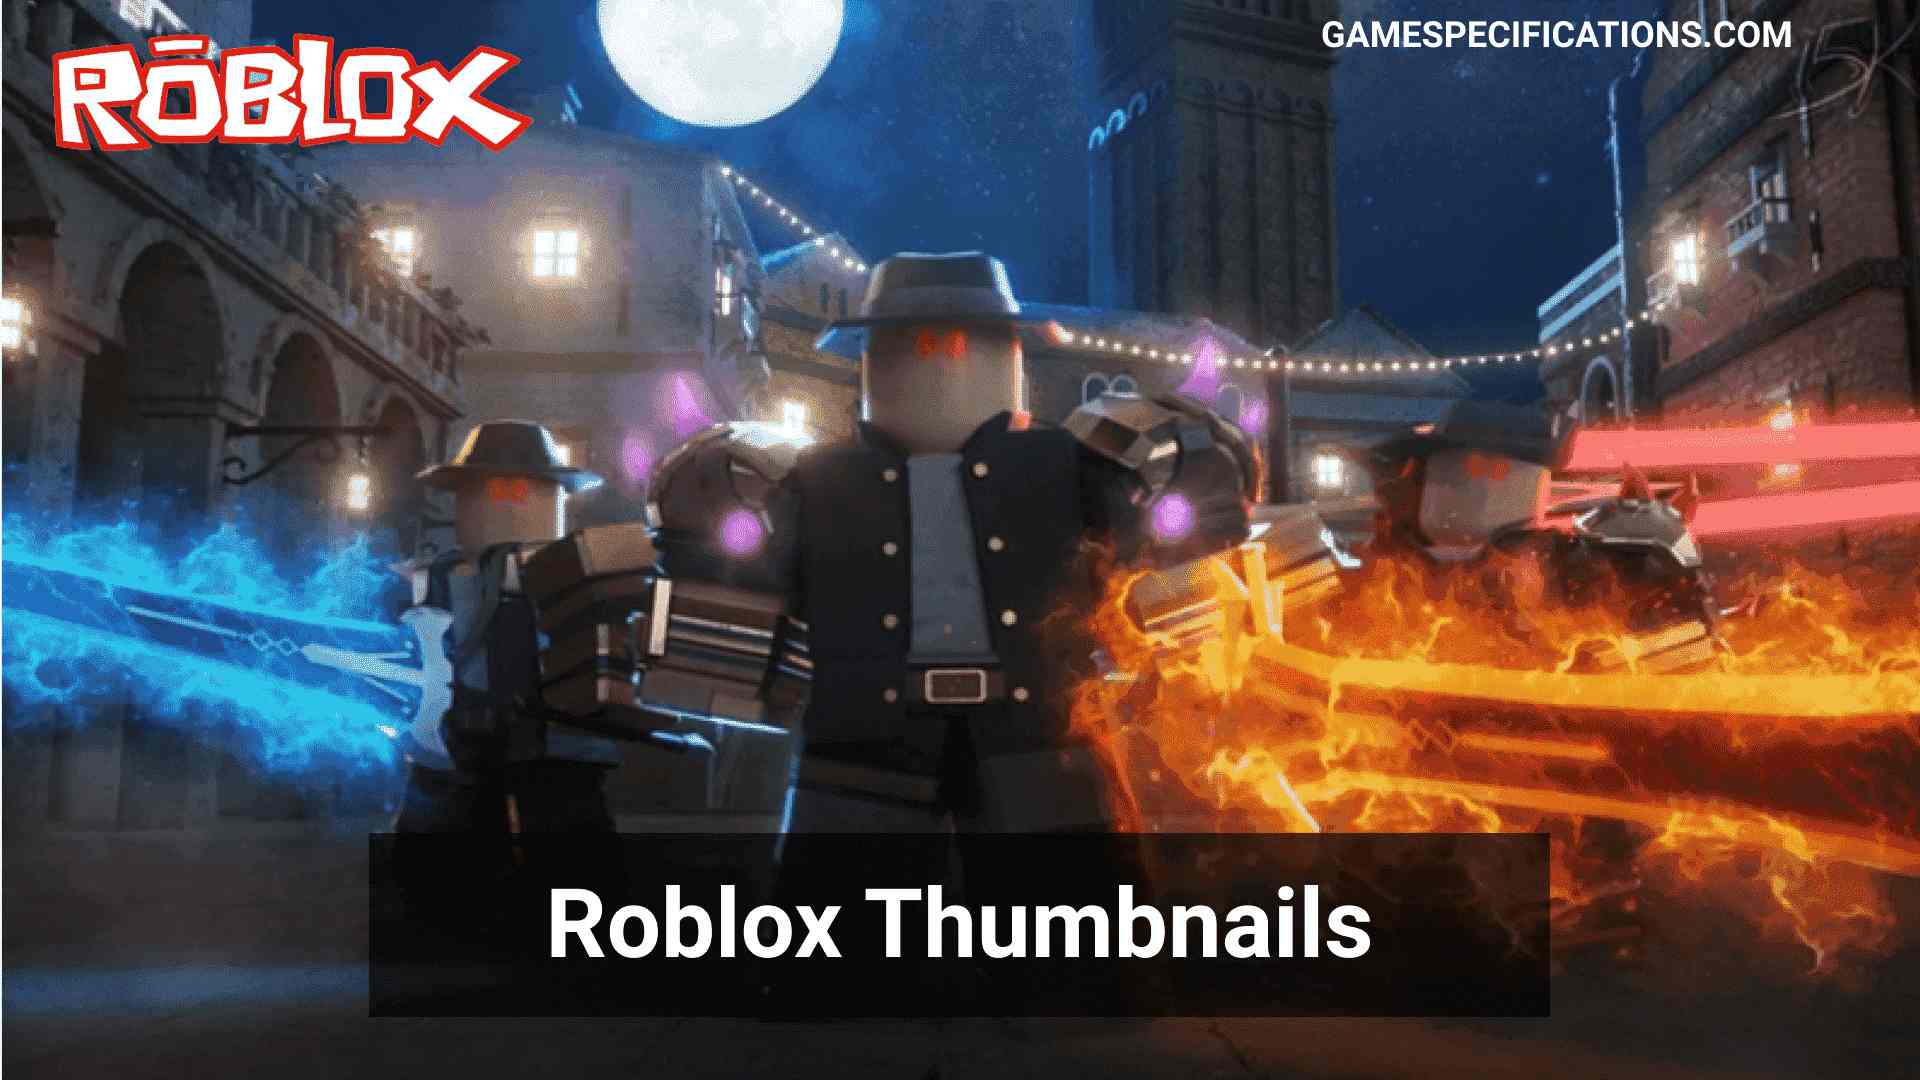 Roblox Thumbnails An Ultimate Guide On Awesome Thumbnails Generation 2021 Game Specifications - roblox will auto generated thumbnail save through updates